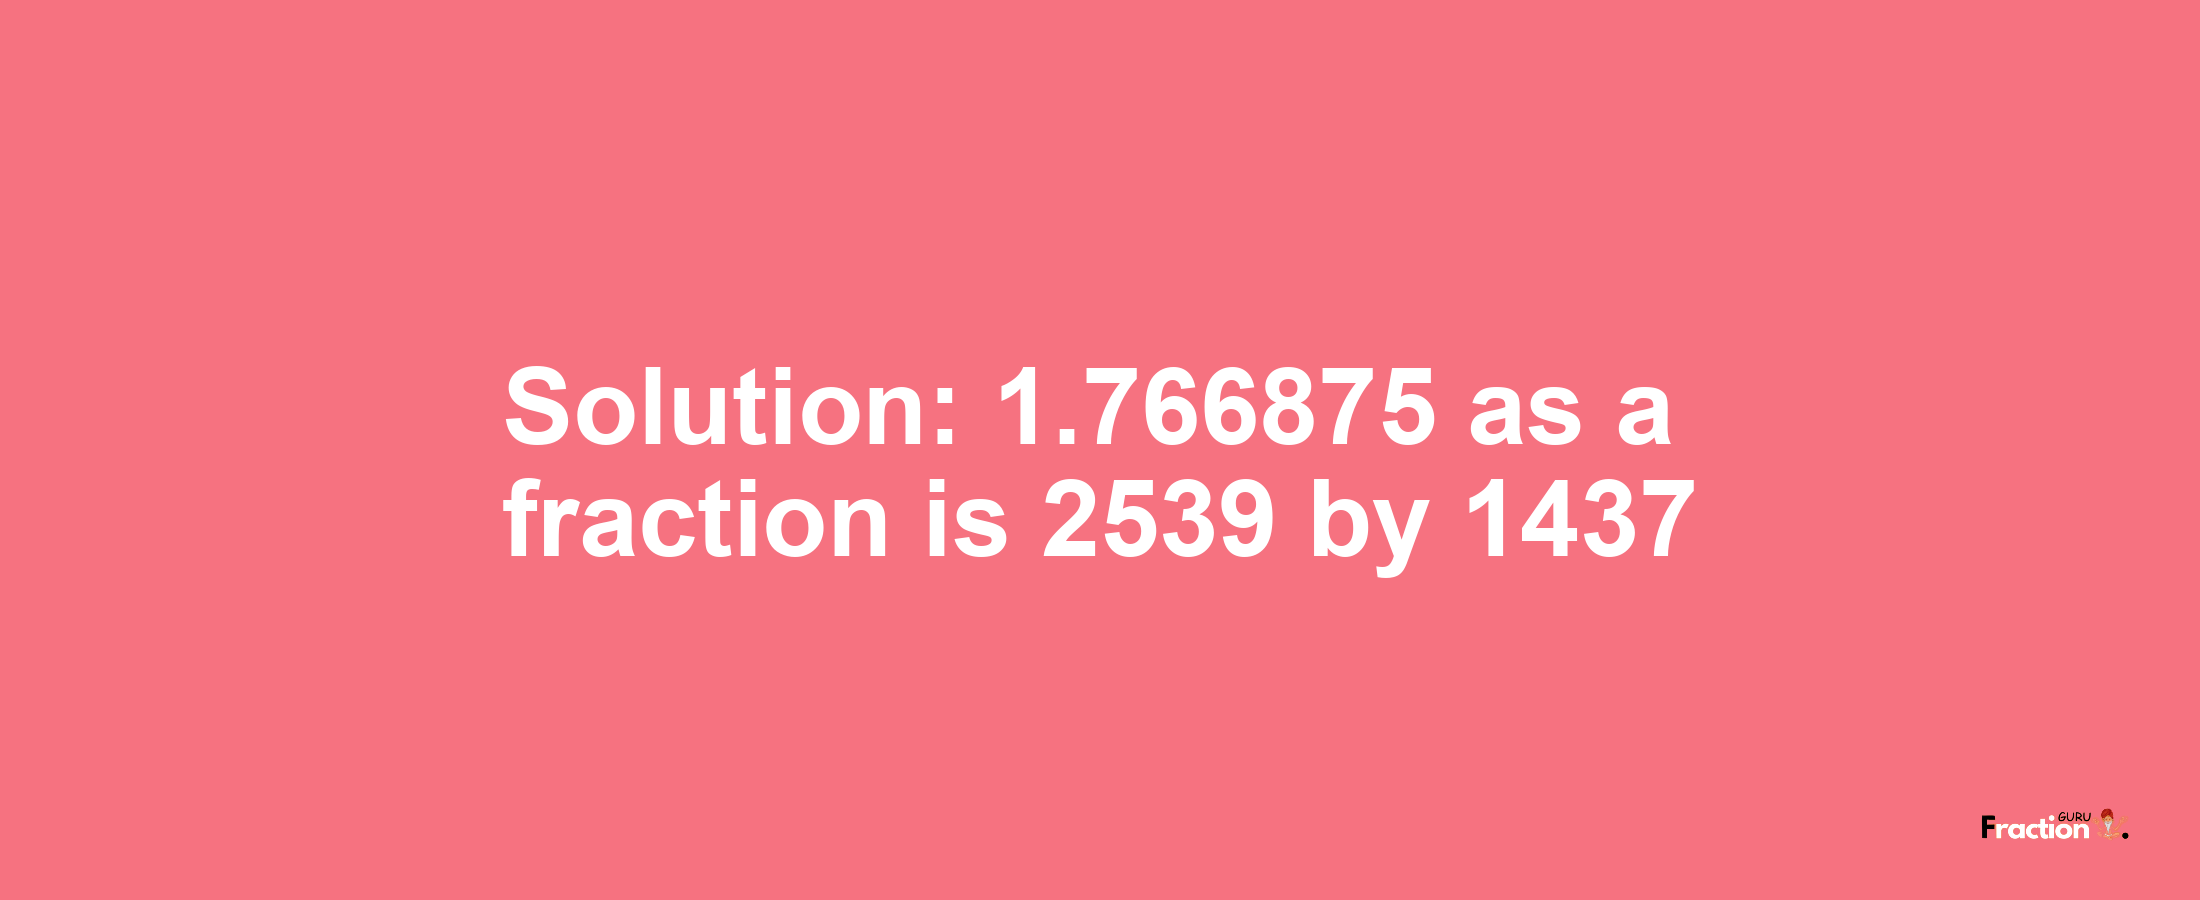 Solution:1.766875 as a fraction is 2539/1437